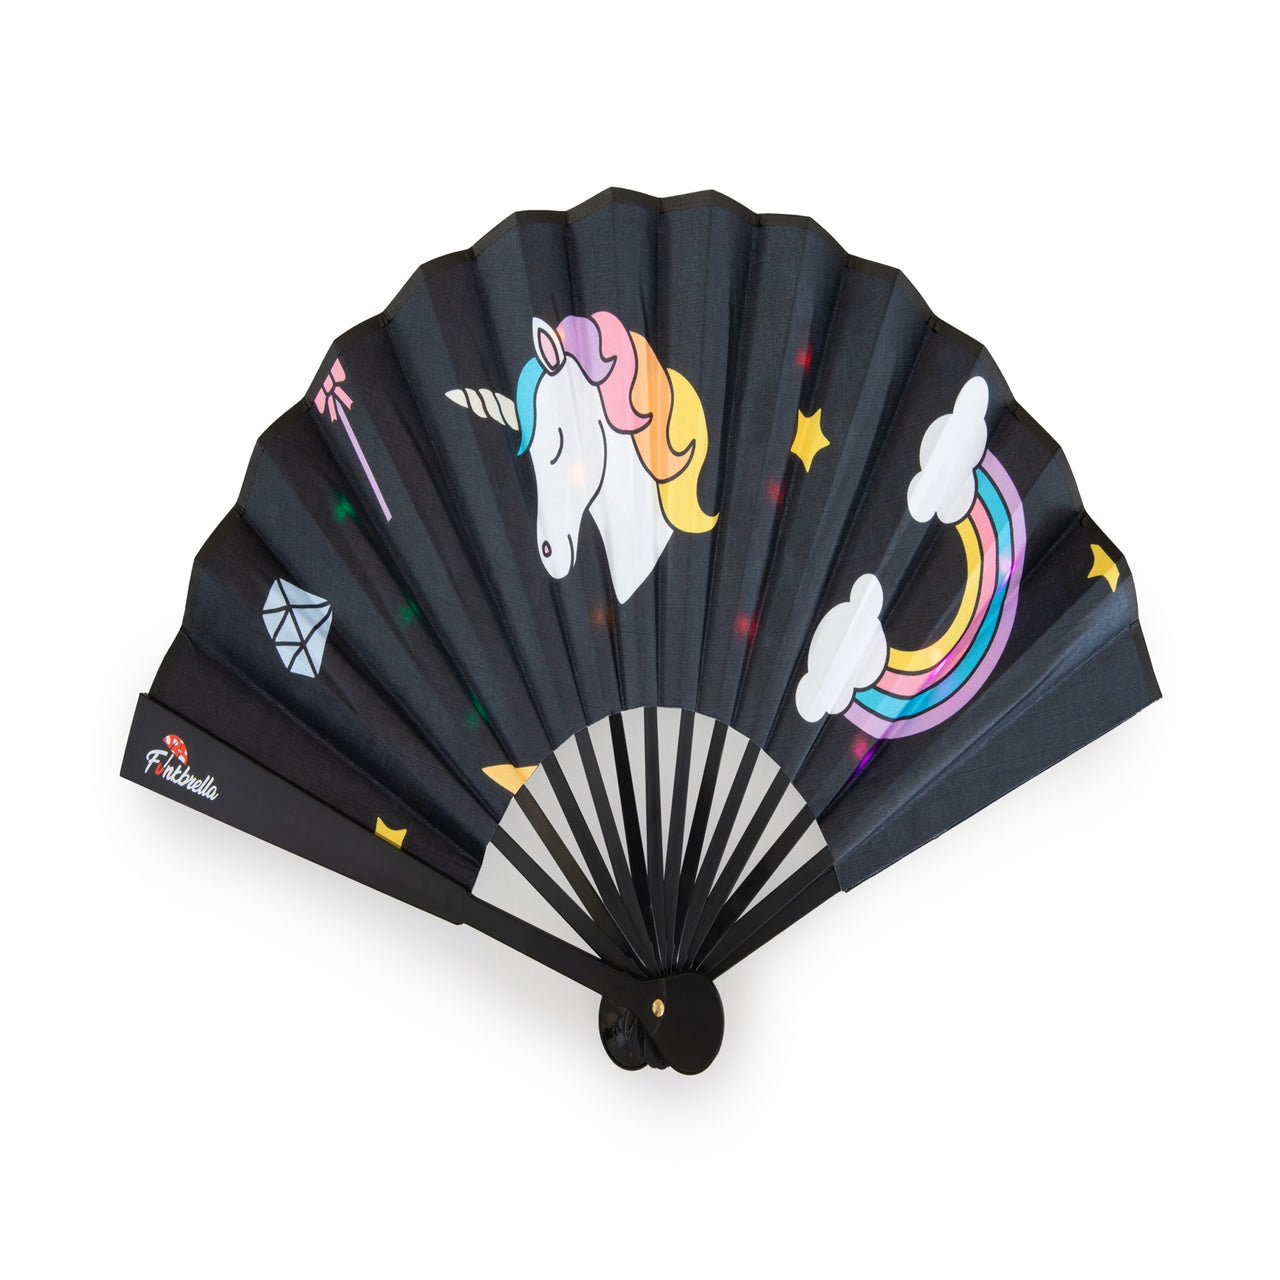 LED Hand Fan - "Magical Unicorn" - Foldable Hand Fan to Stay Cool While Dancing the Night Away